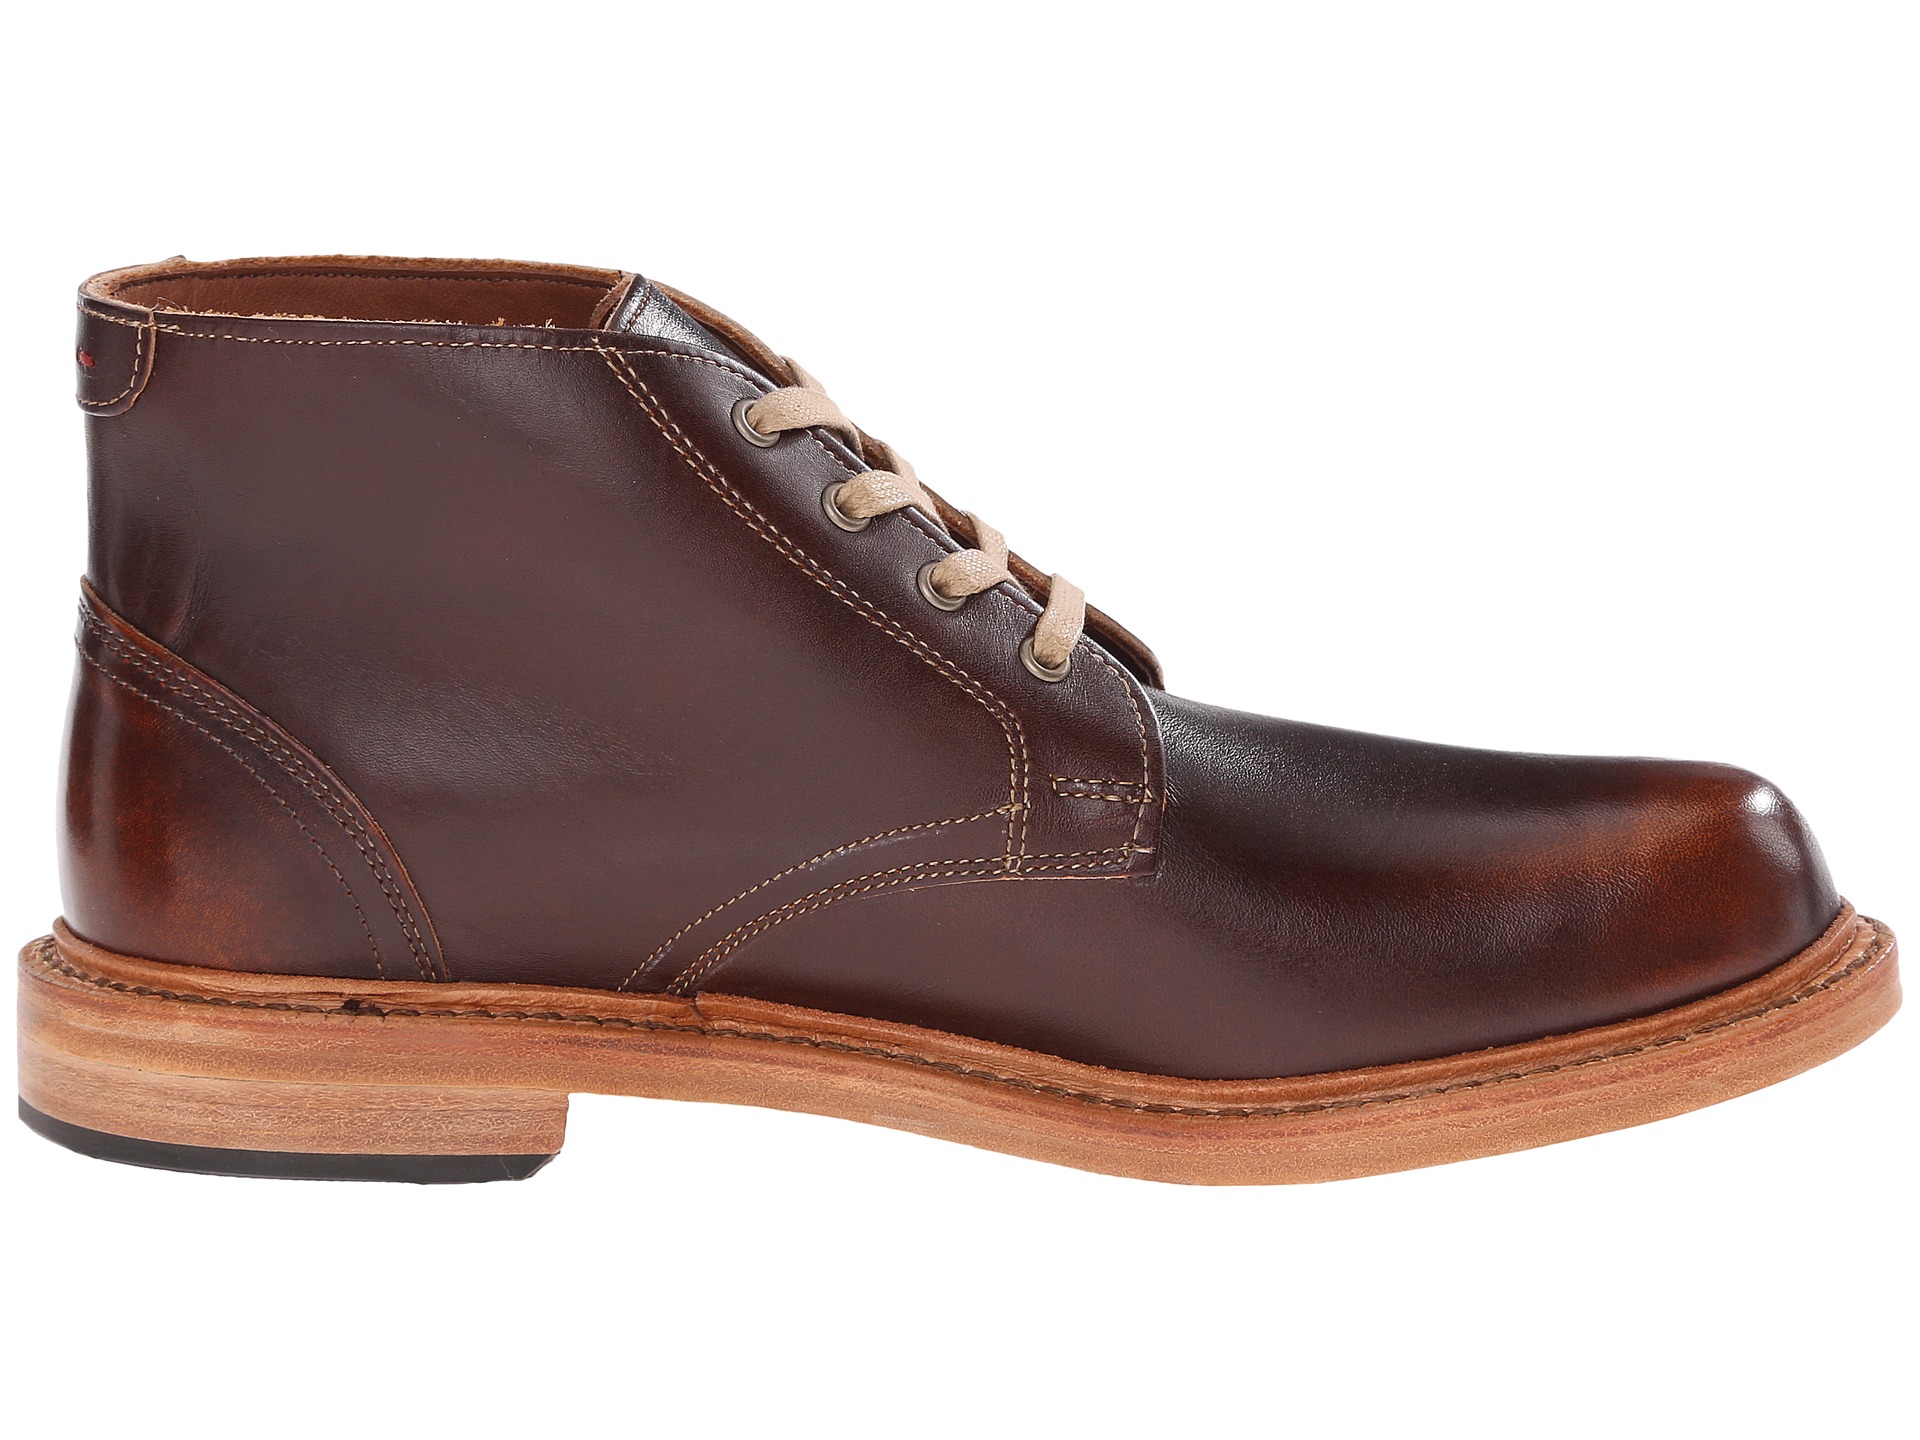 Allen-Edmonds Odenwald Brown Leather - Zappos.com Free Shipping BOTH Ways